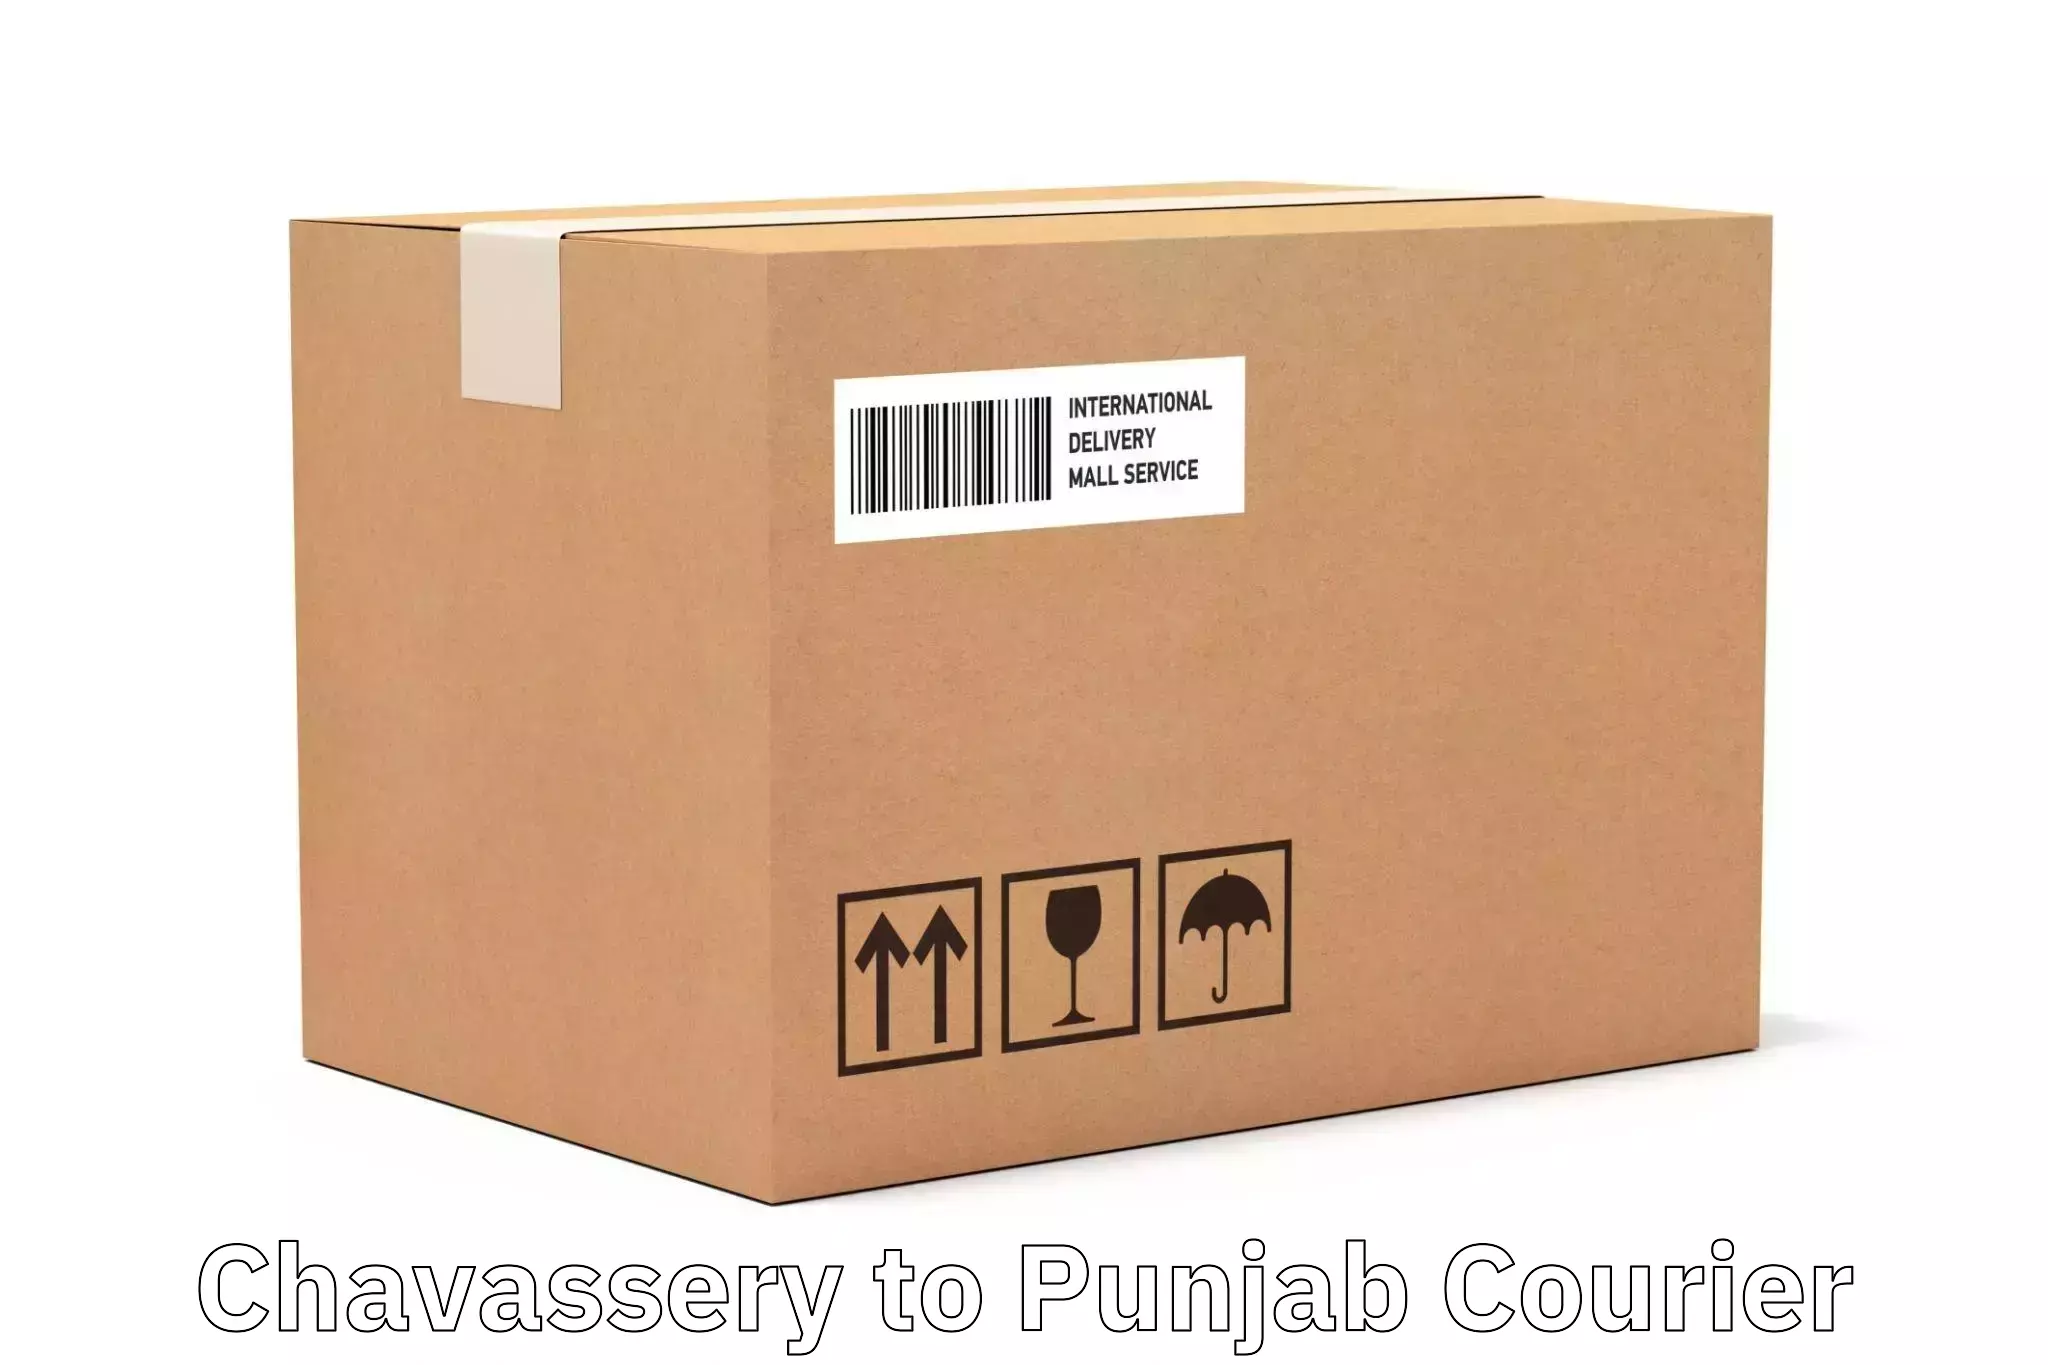 Professional parcel services Chavassery to Talwandi Sabo